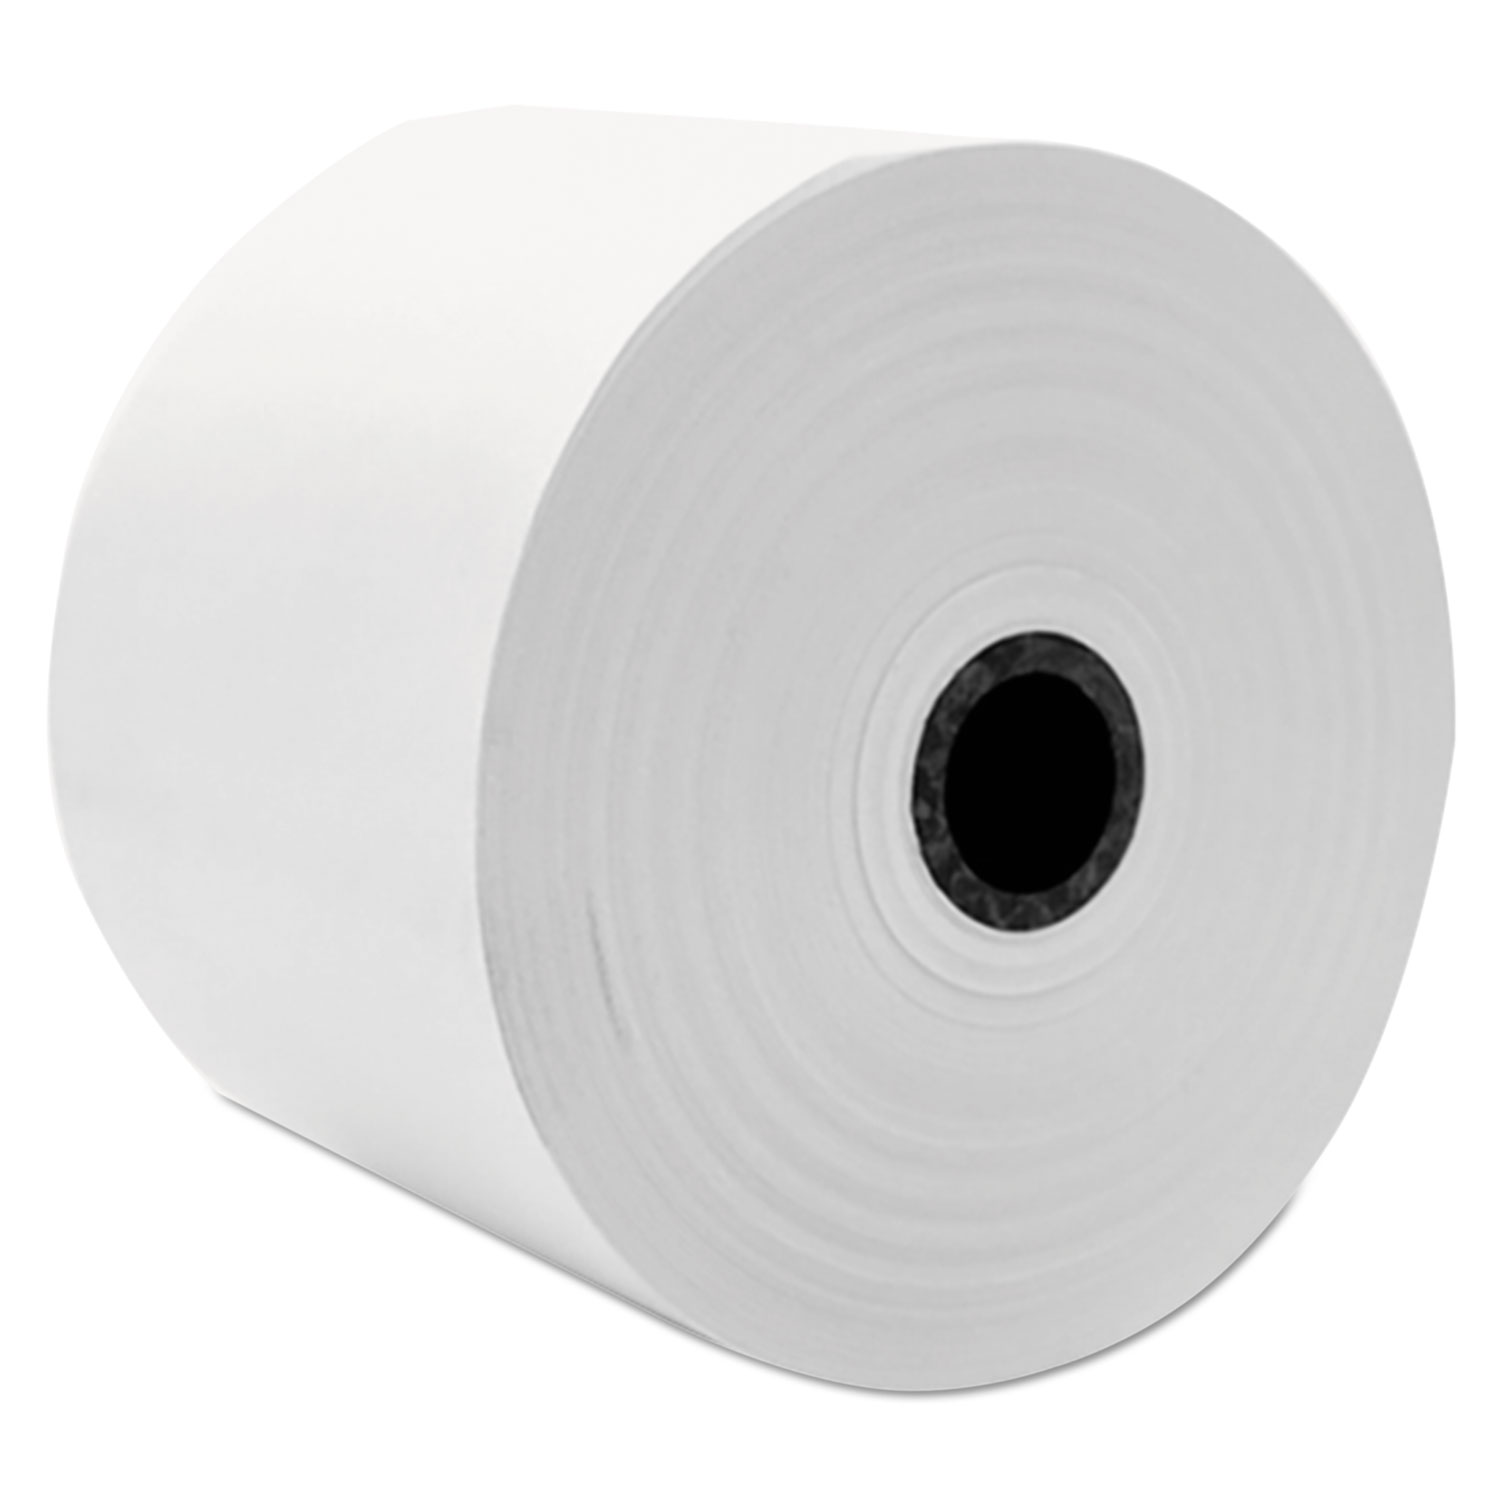 Direct Thermal Printing Thermal Paper Rolls, 2 5/16 x 918 ft, White, 8/Carton